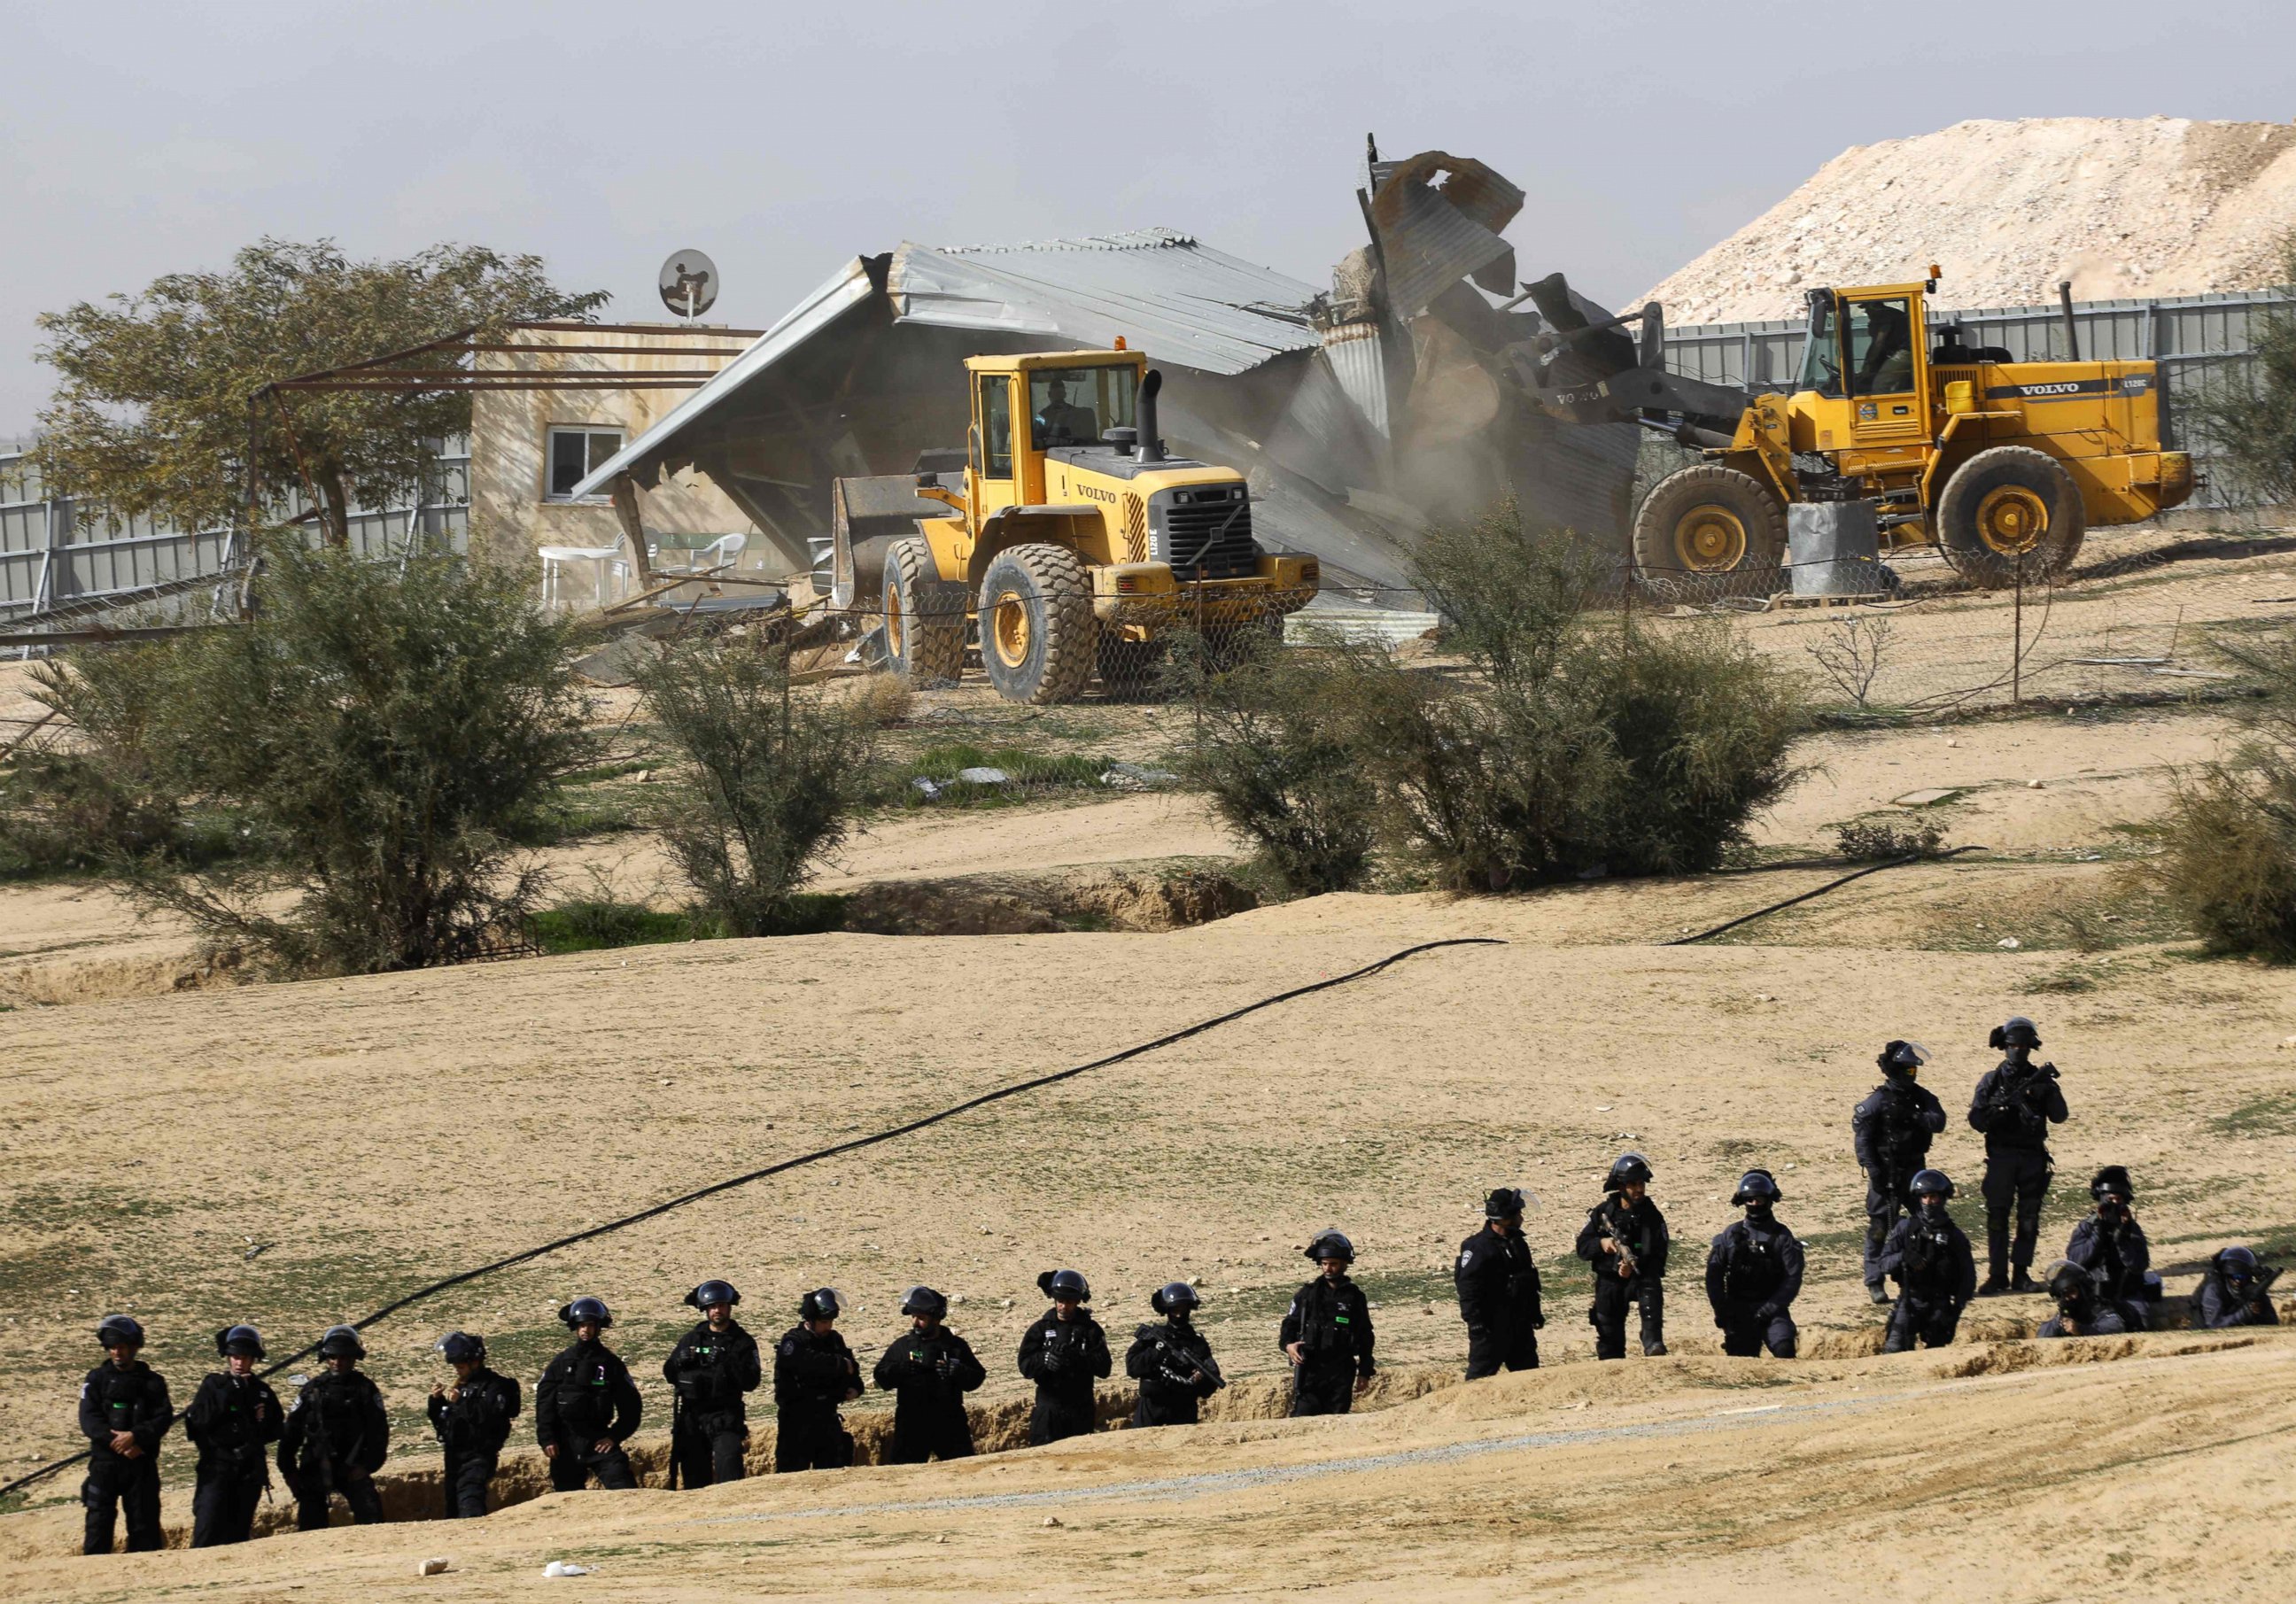 PHOTO: Israeli policemen stand guard as bulldozers demolish homes in the Bedouin village of Umm al-Hiran, which is not recognized by the Israeli government, near the southern city of Beersheba, in the Negev desert, on Jan. 18, 2017.